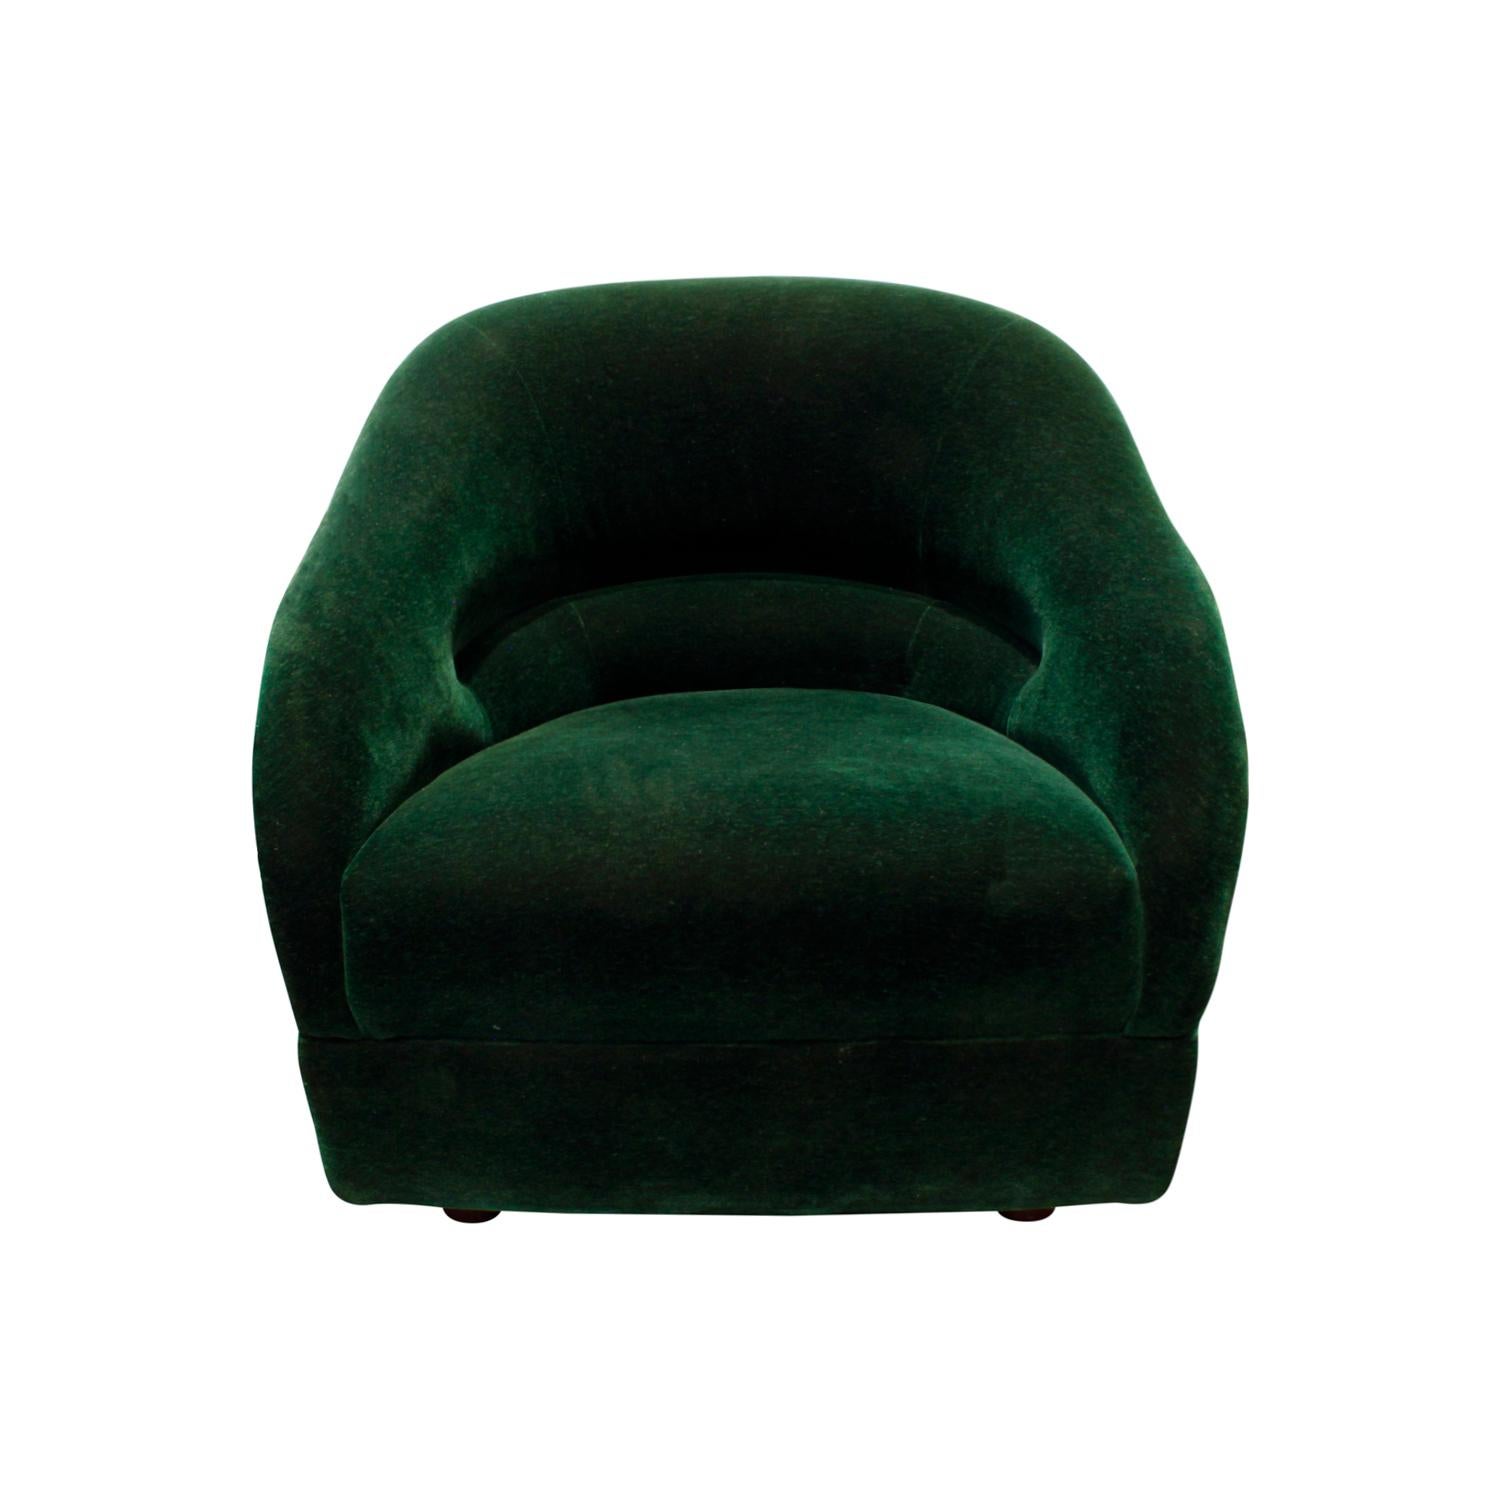 Pair of lounge chairs model no.Q2083 with pleated back on recessed mahogany legs upholstered in green velvet by Ward Bennett for Brickel Associates, American 1960s. Label on the bottom reads “Ward Bennett Designs for Brickel Associates”. These